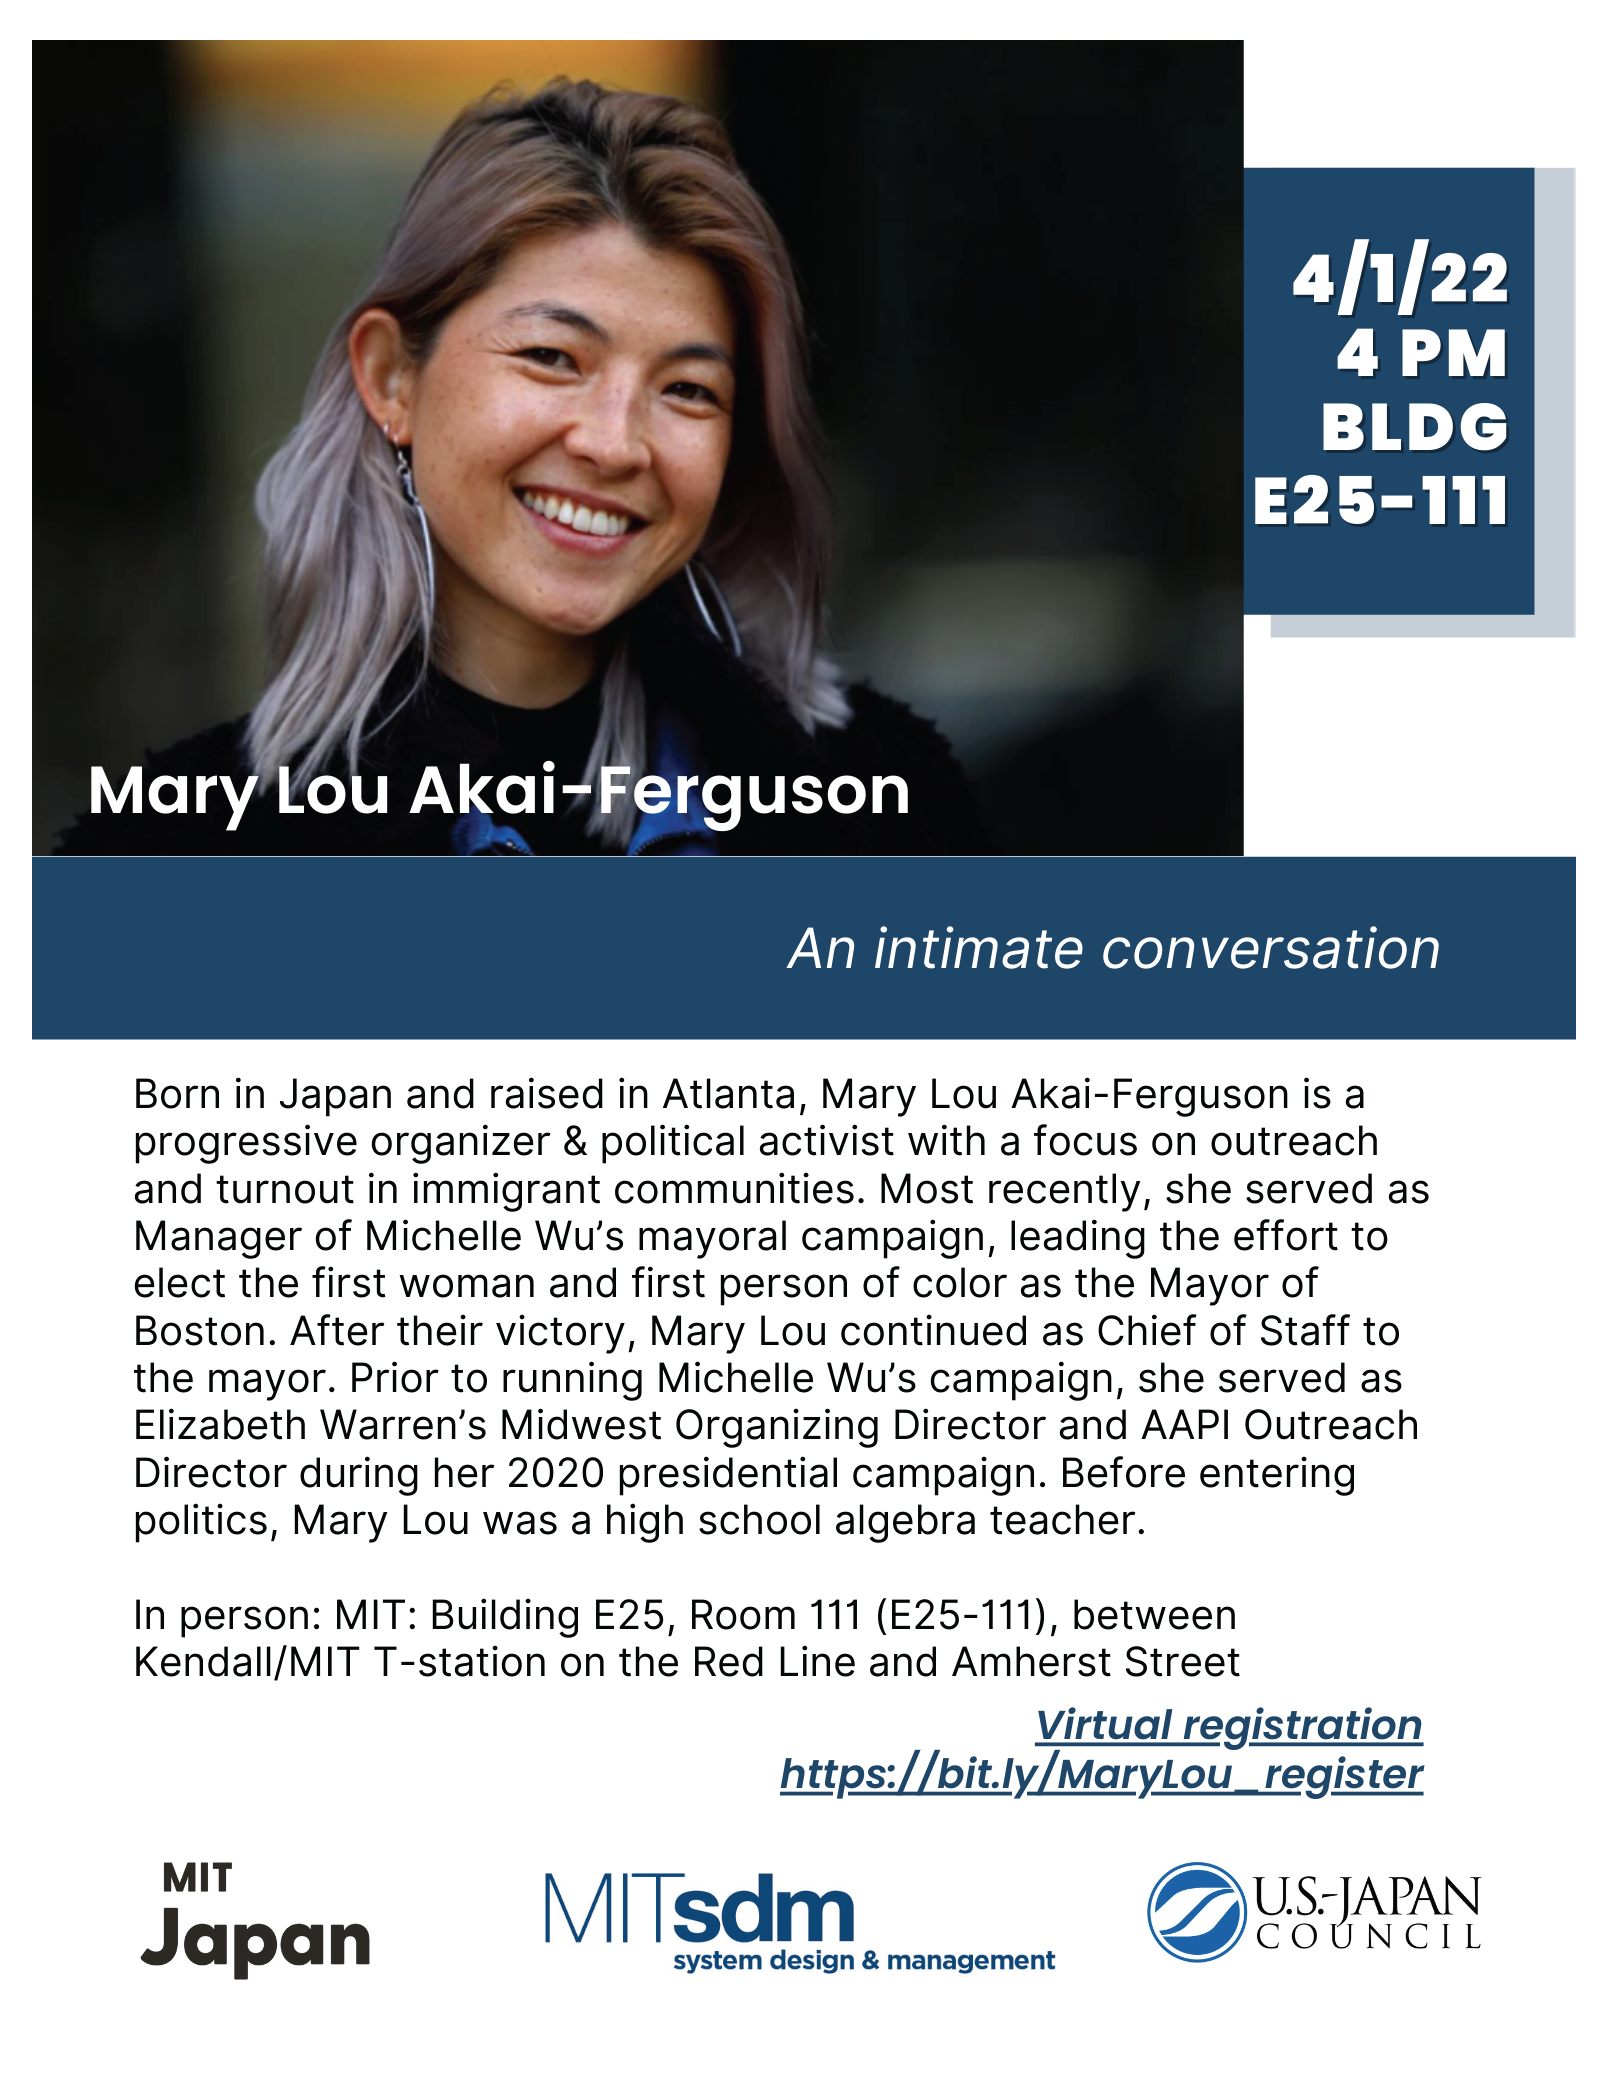 mit japan mary lou event flyer